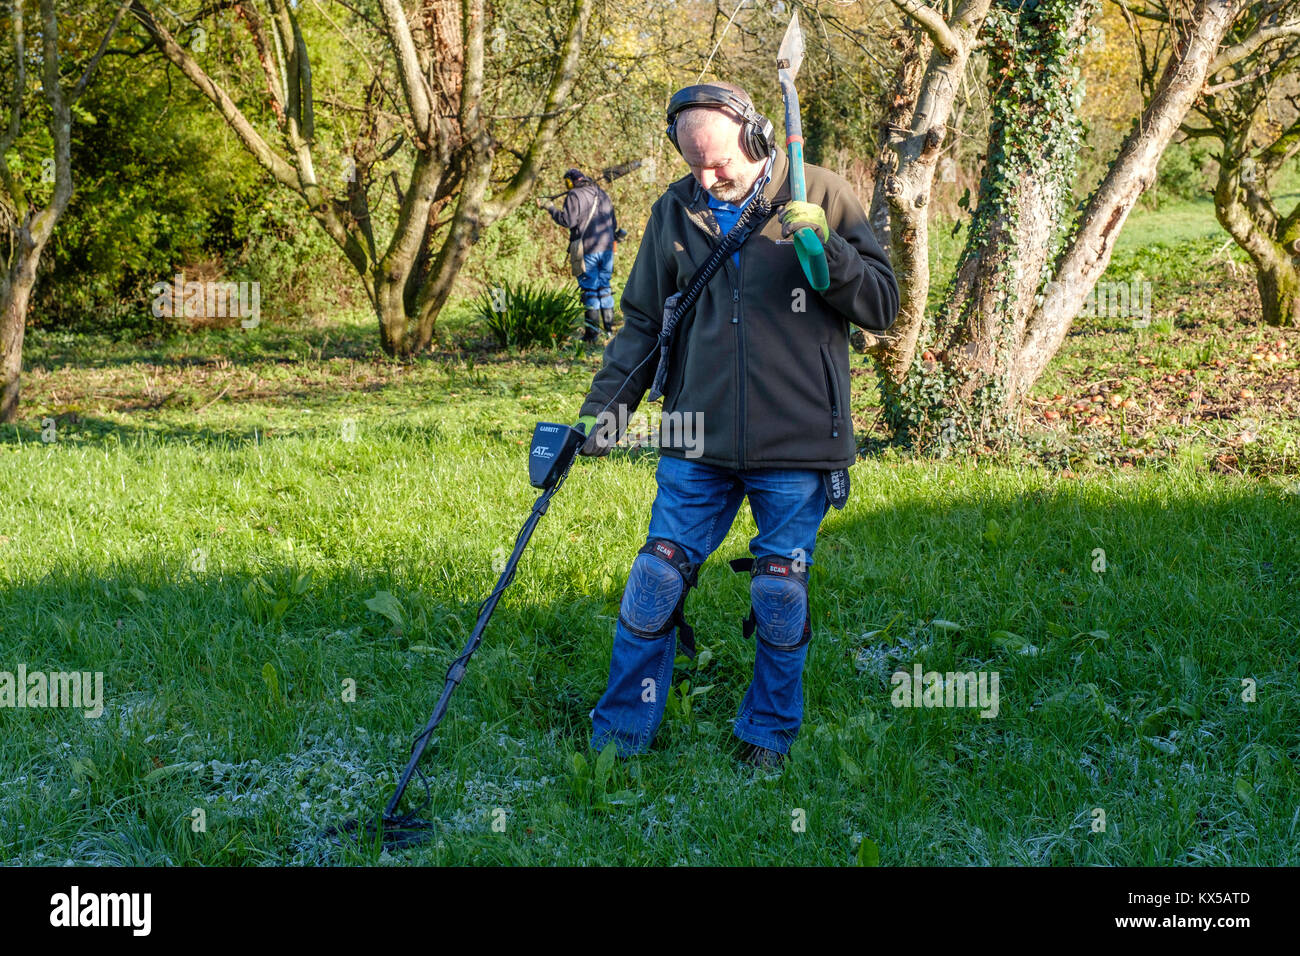 METAL DETECTING IN OLD ORCHARD. UK Stock Photo